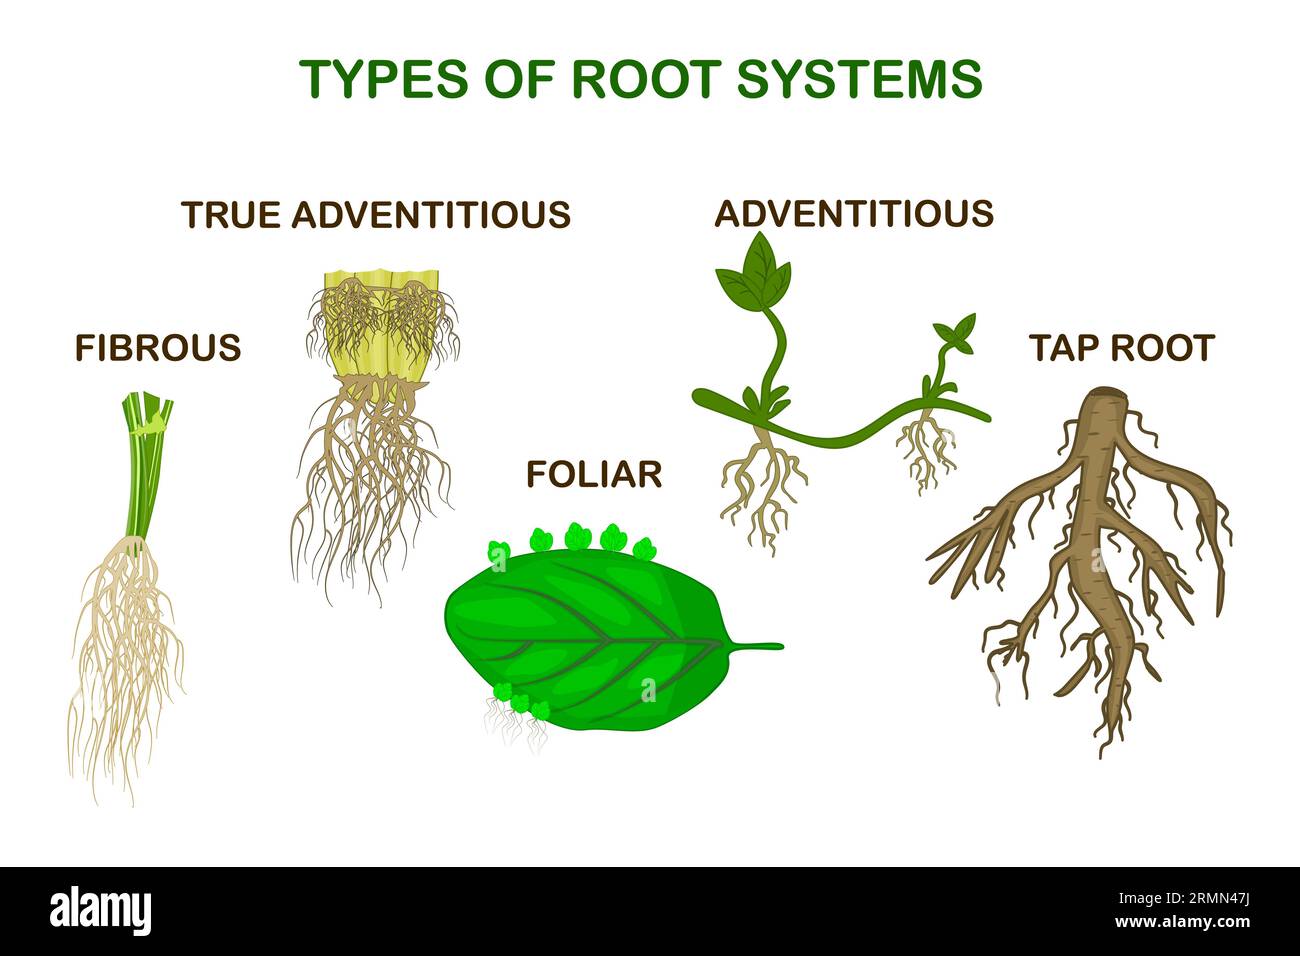 Types of root systems of plants, monocot and dicot. Taproot, adventitious, true adventitious, foliar and fibrous root example comparison. Vector Stock Vector